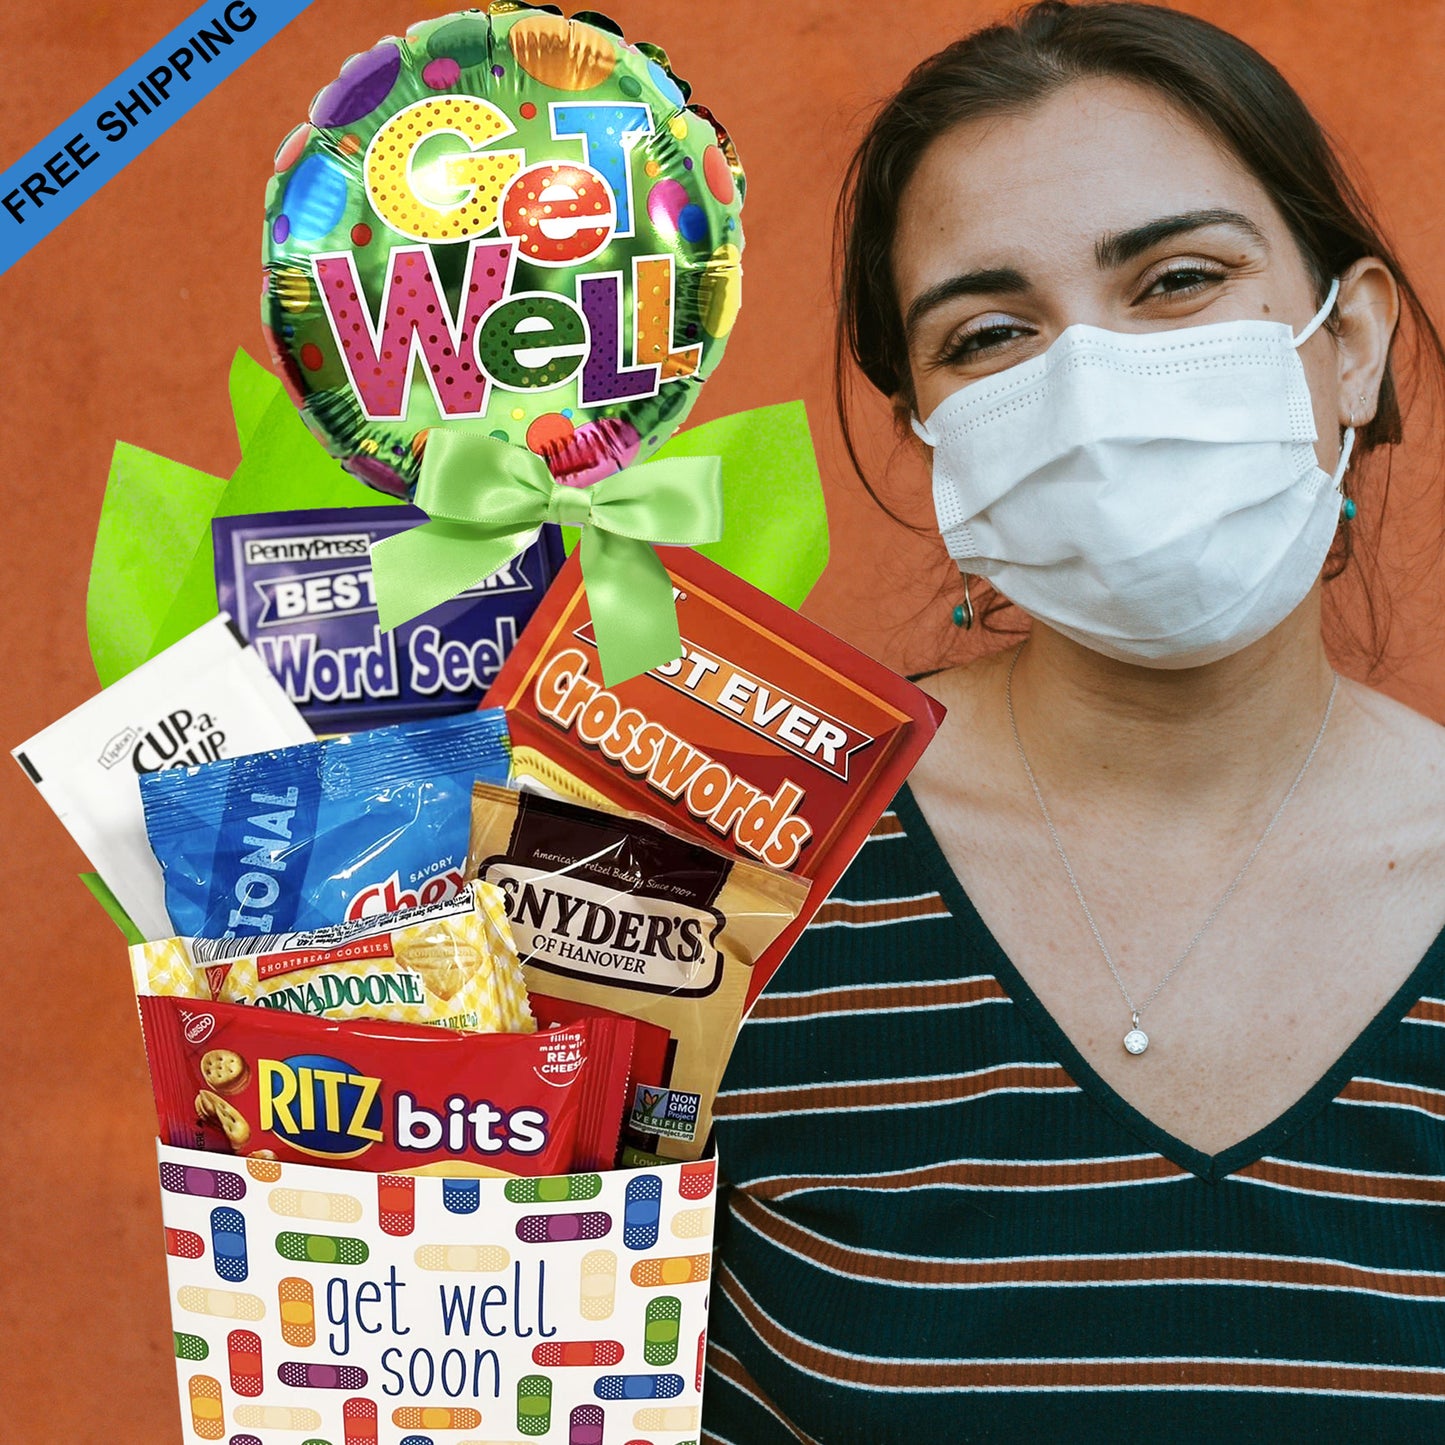 Get Well Soon Gifts for Women, Self Care Package, After Surgery Recovery, Thinking of You, Sympathy Gift Basket, Feel Better Gifts for Sick Friend